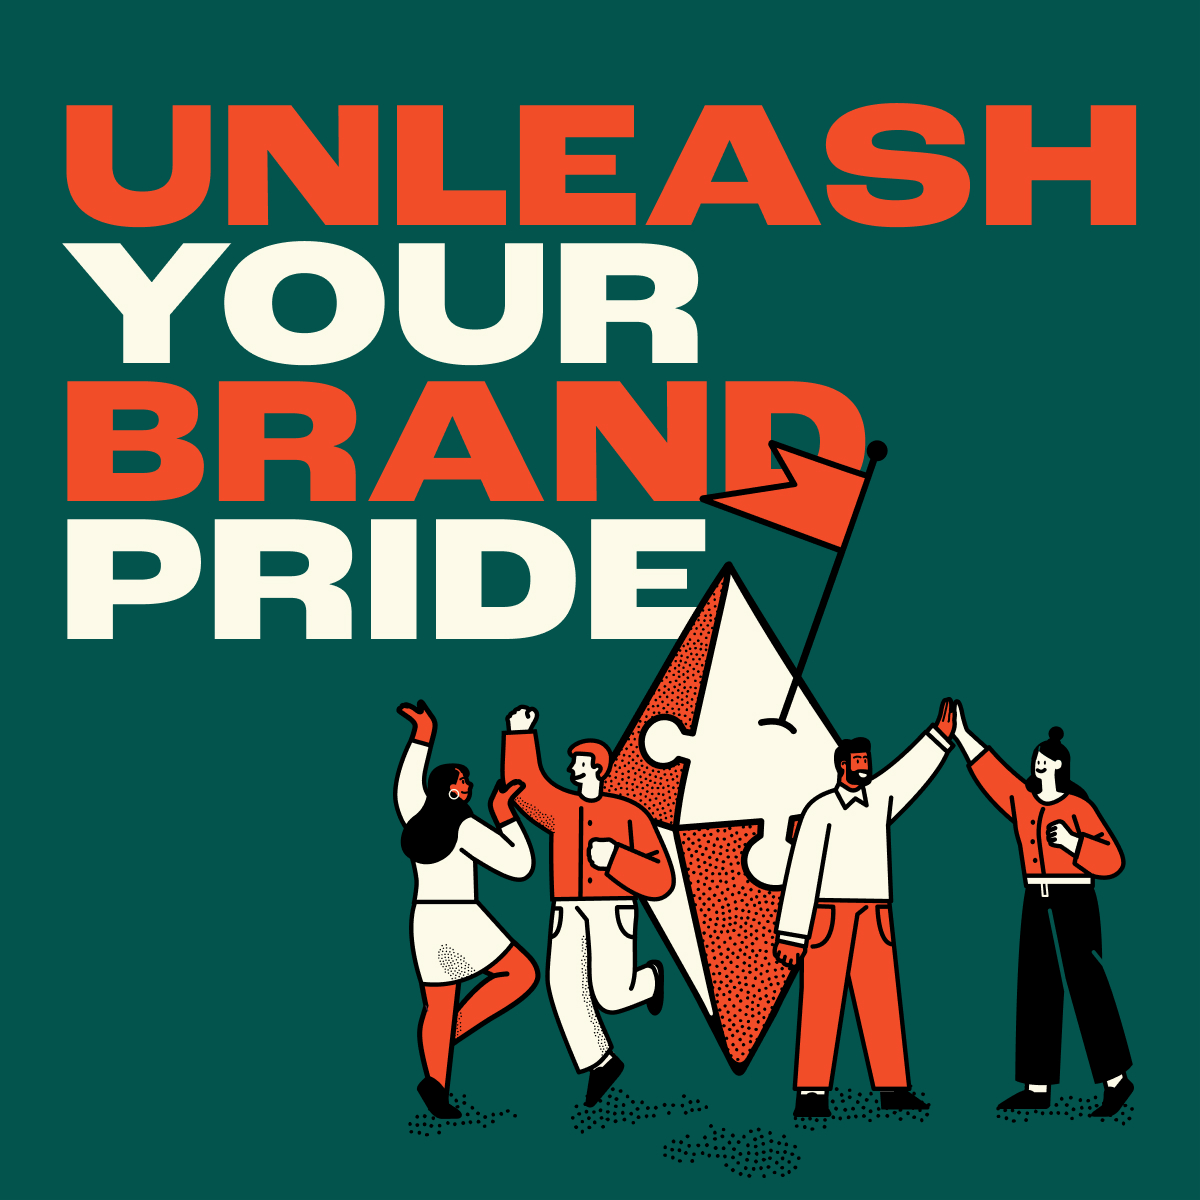 Unleash your brand pride—and watch it grow